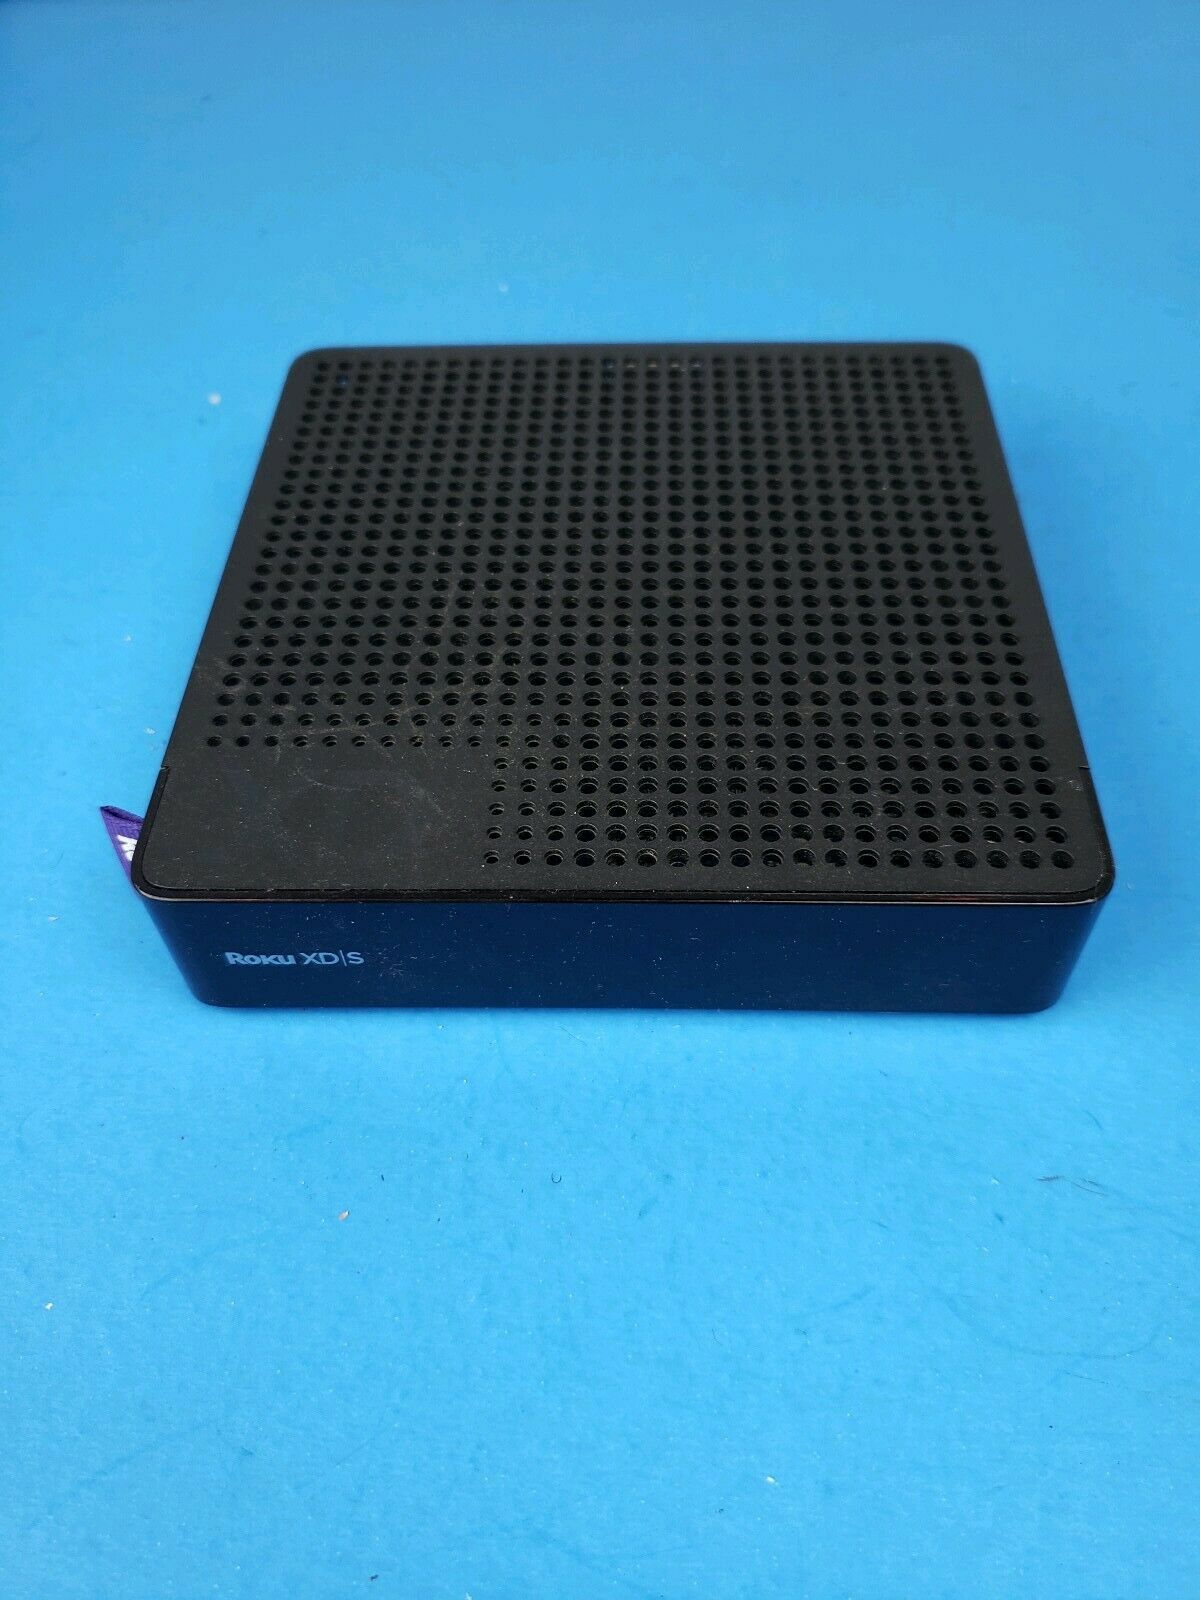 Primary image for ROKU BOX XD-S MODEL 2100X * no remote or power supply